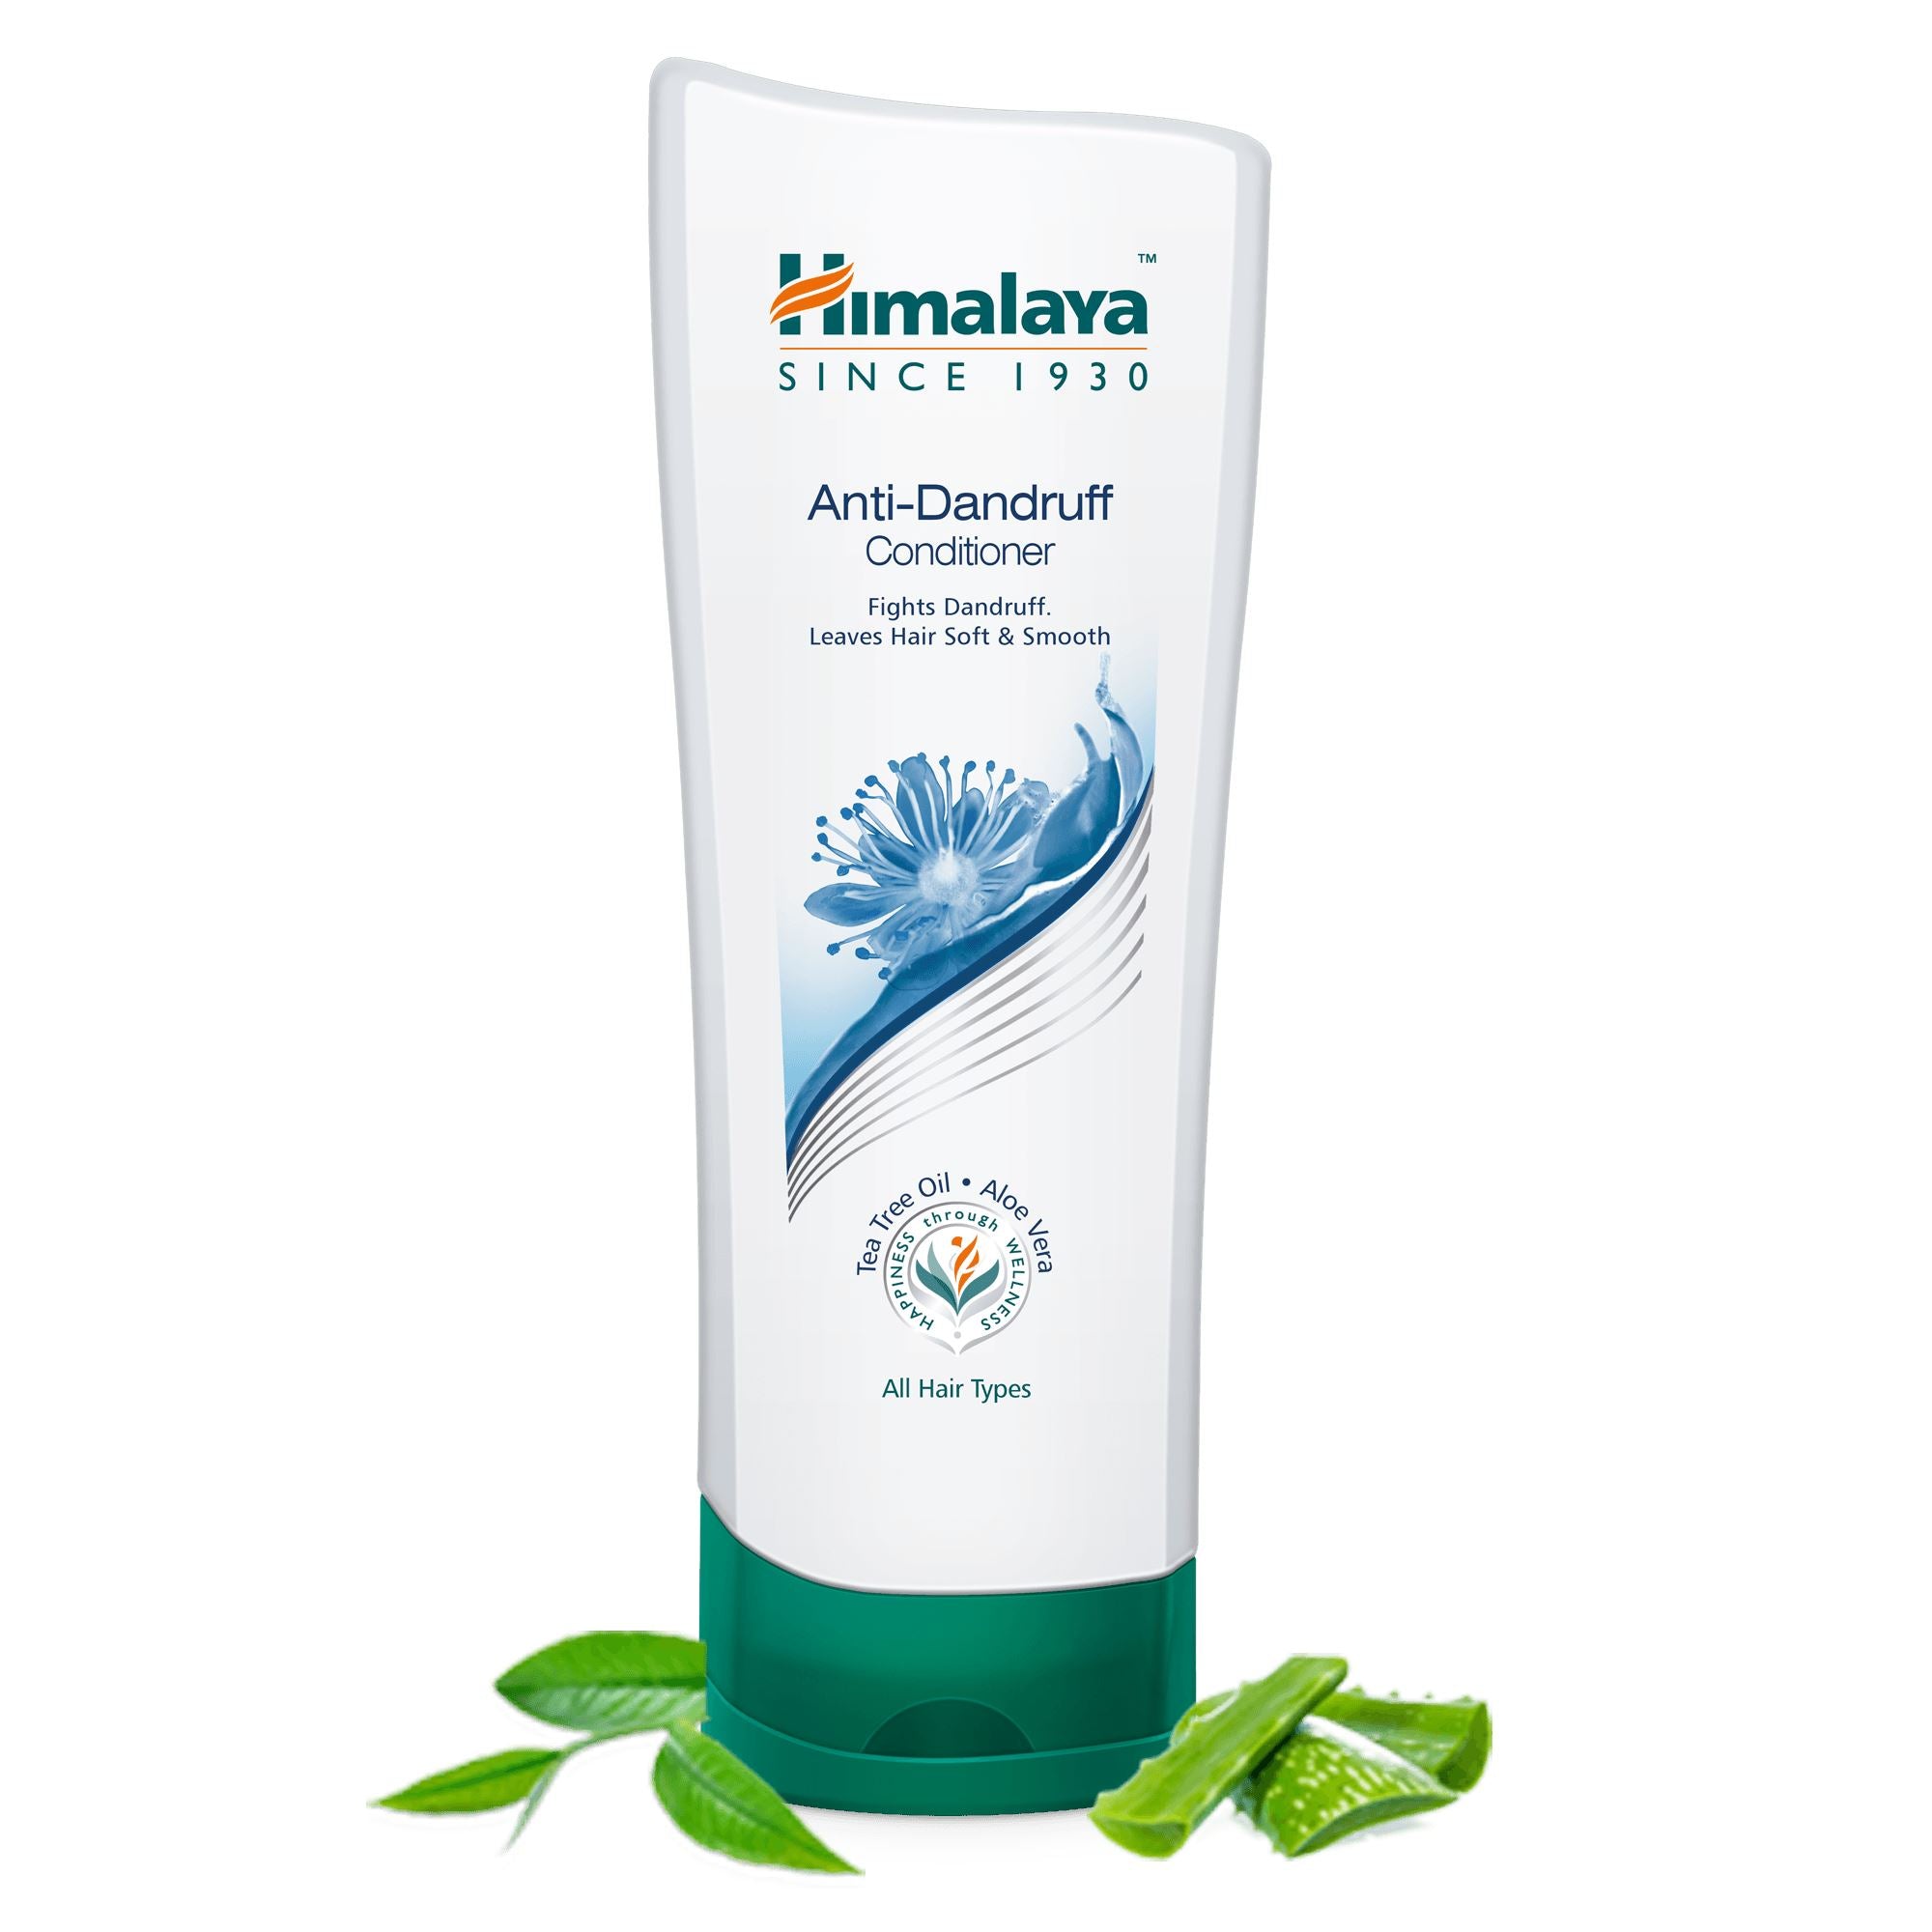 Himalaya Anti-Dandruff Conditioner 100ml - Fights dandruff and leaves hair soft and smooth